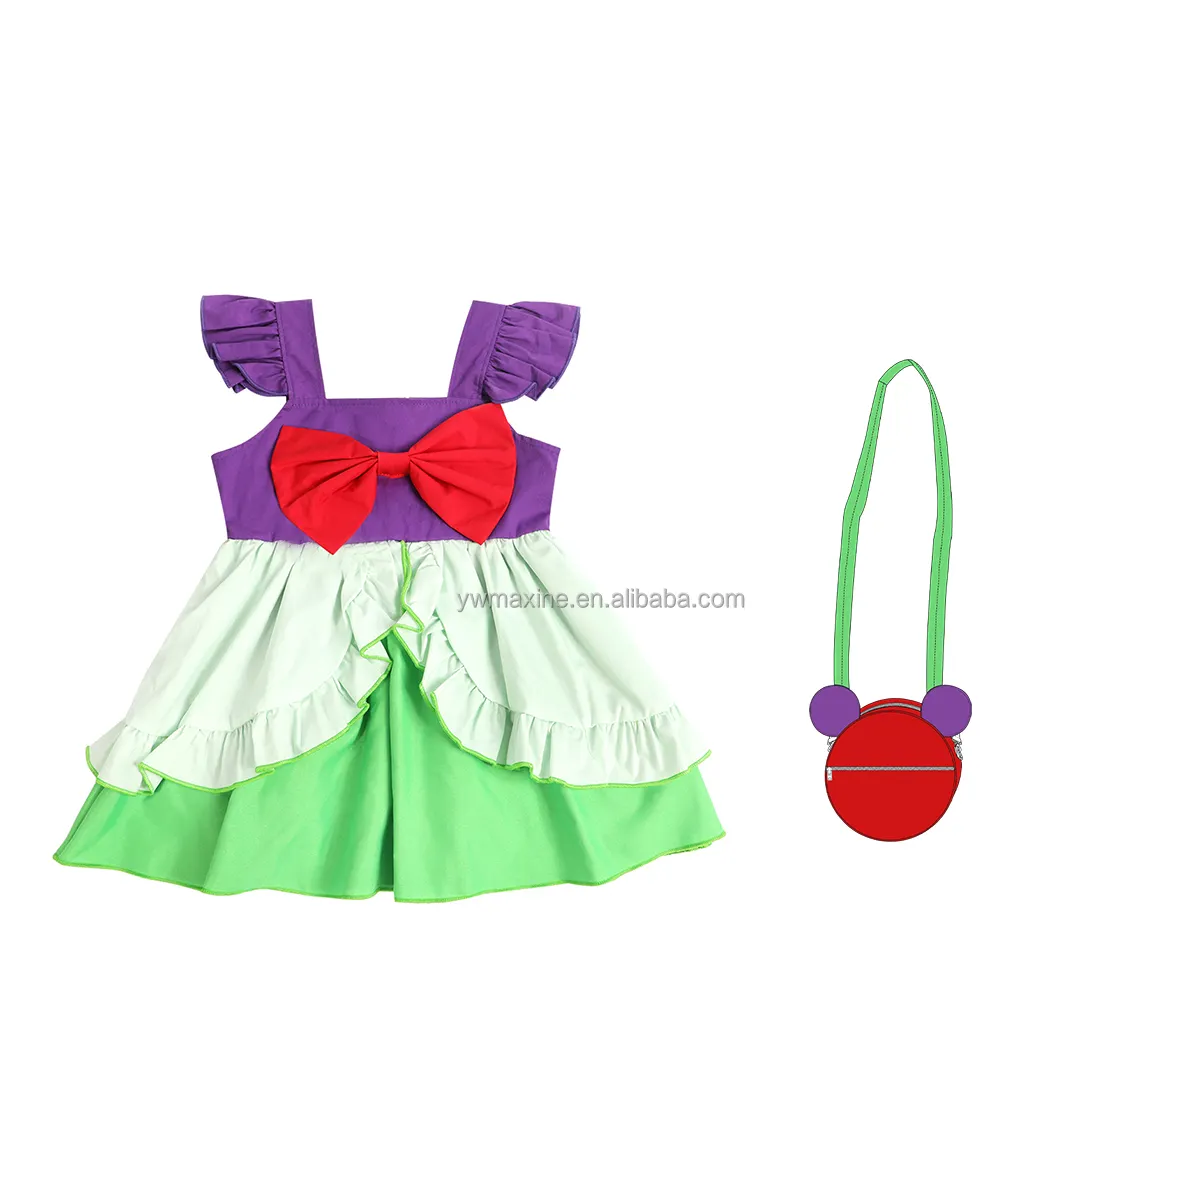 Children Clothes Lovely Character Princess Kids Dresses for Girls Costume Toddler Fancy Party Dresses